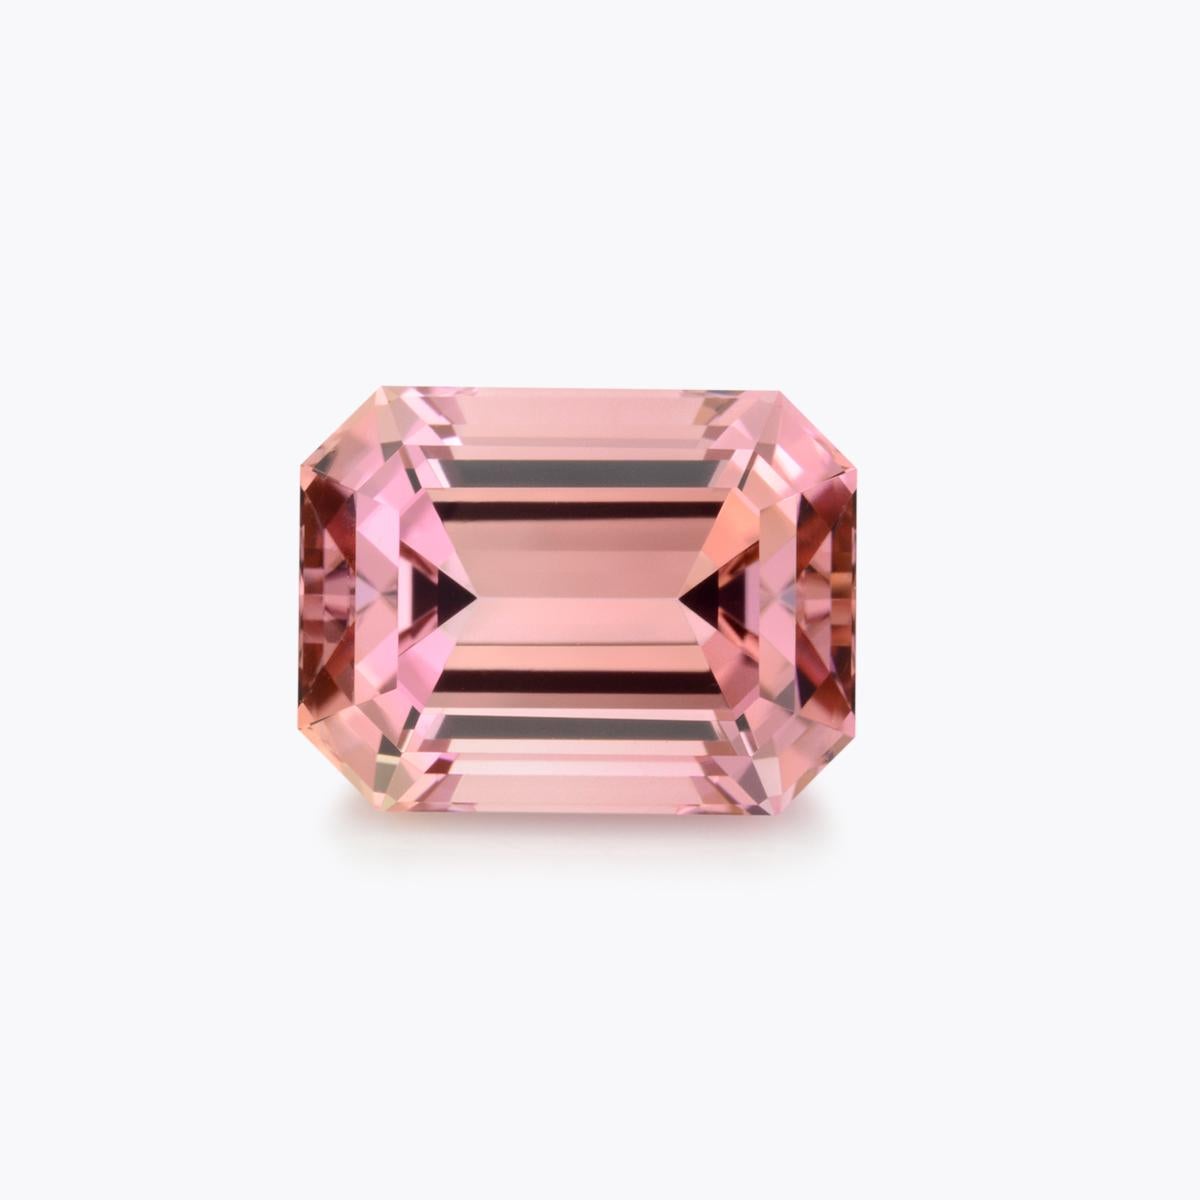 Timeless 4.68 carat Pink Tourmaline Emerald-Cut loose gemstone, offered unmounted to a very special person.
Dimensions: 10.9 x 8.3 x 6.5 mm.
Returns are accepted and paid by us within 7 days of delivery.
We offer supreme custom jewelry work upon